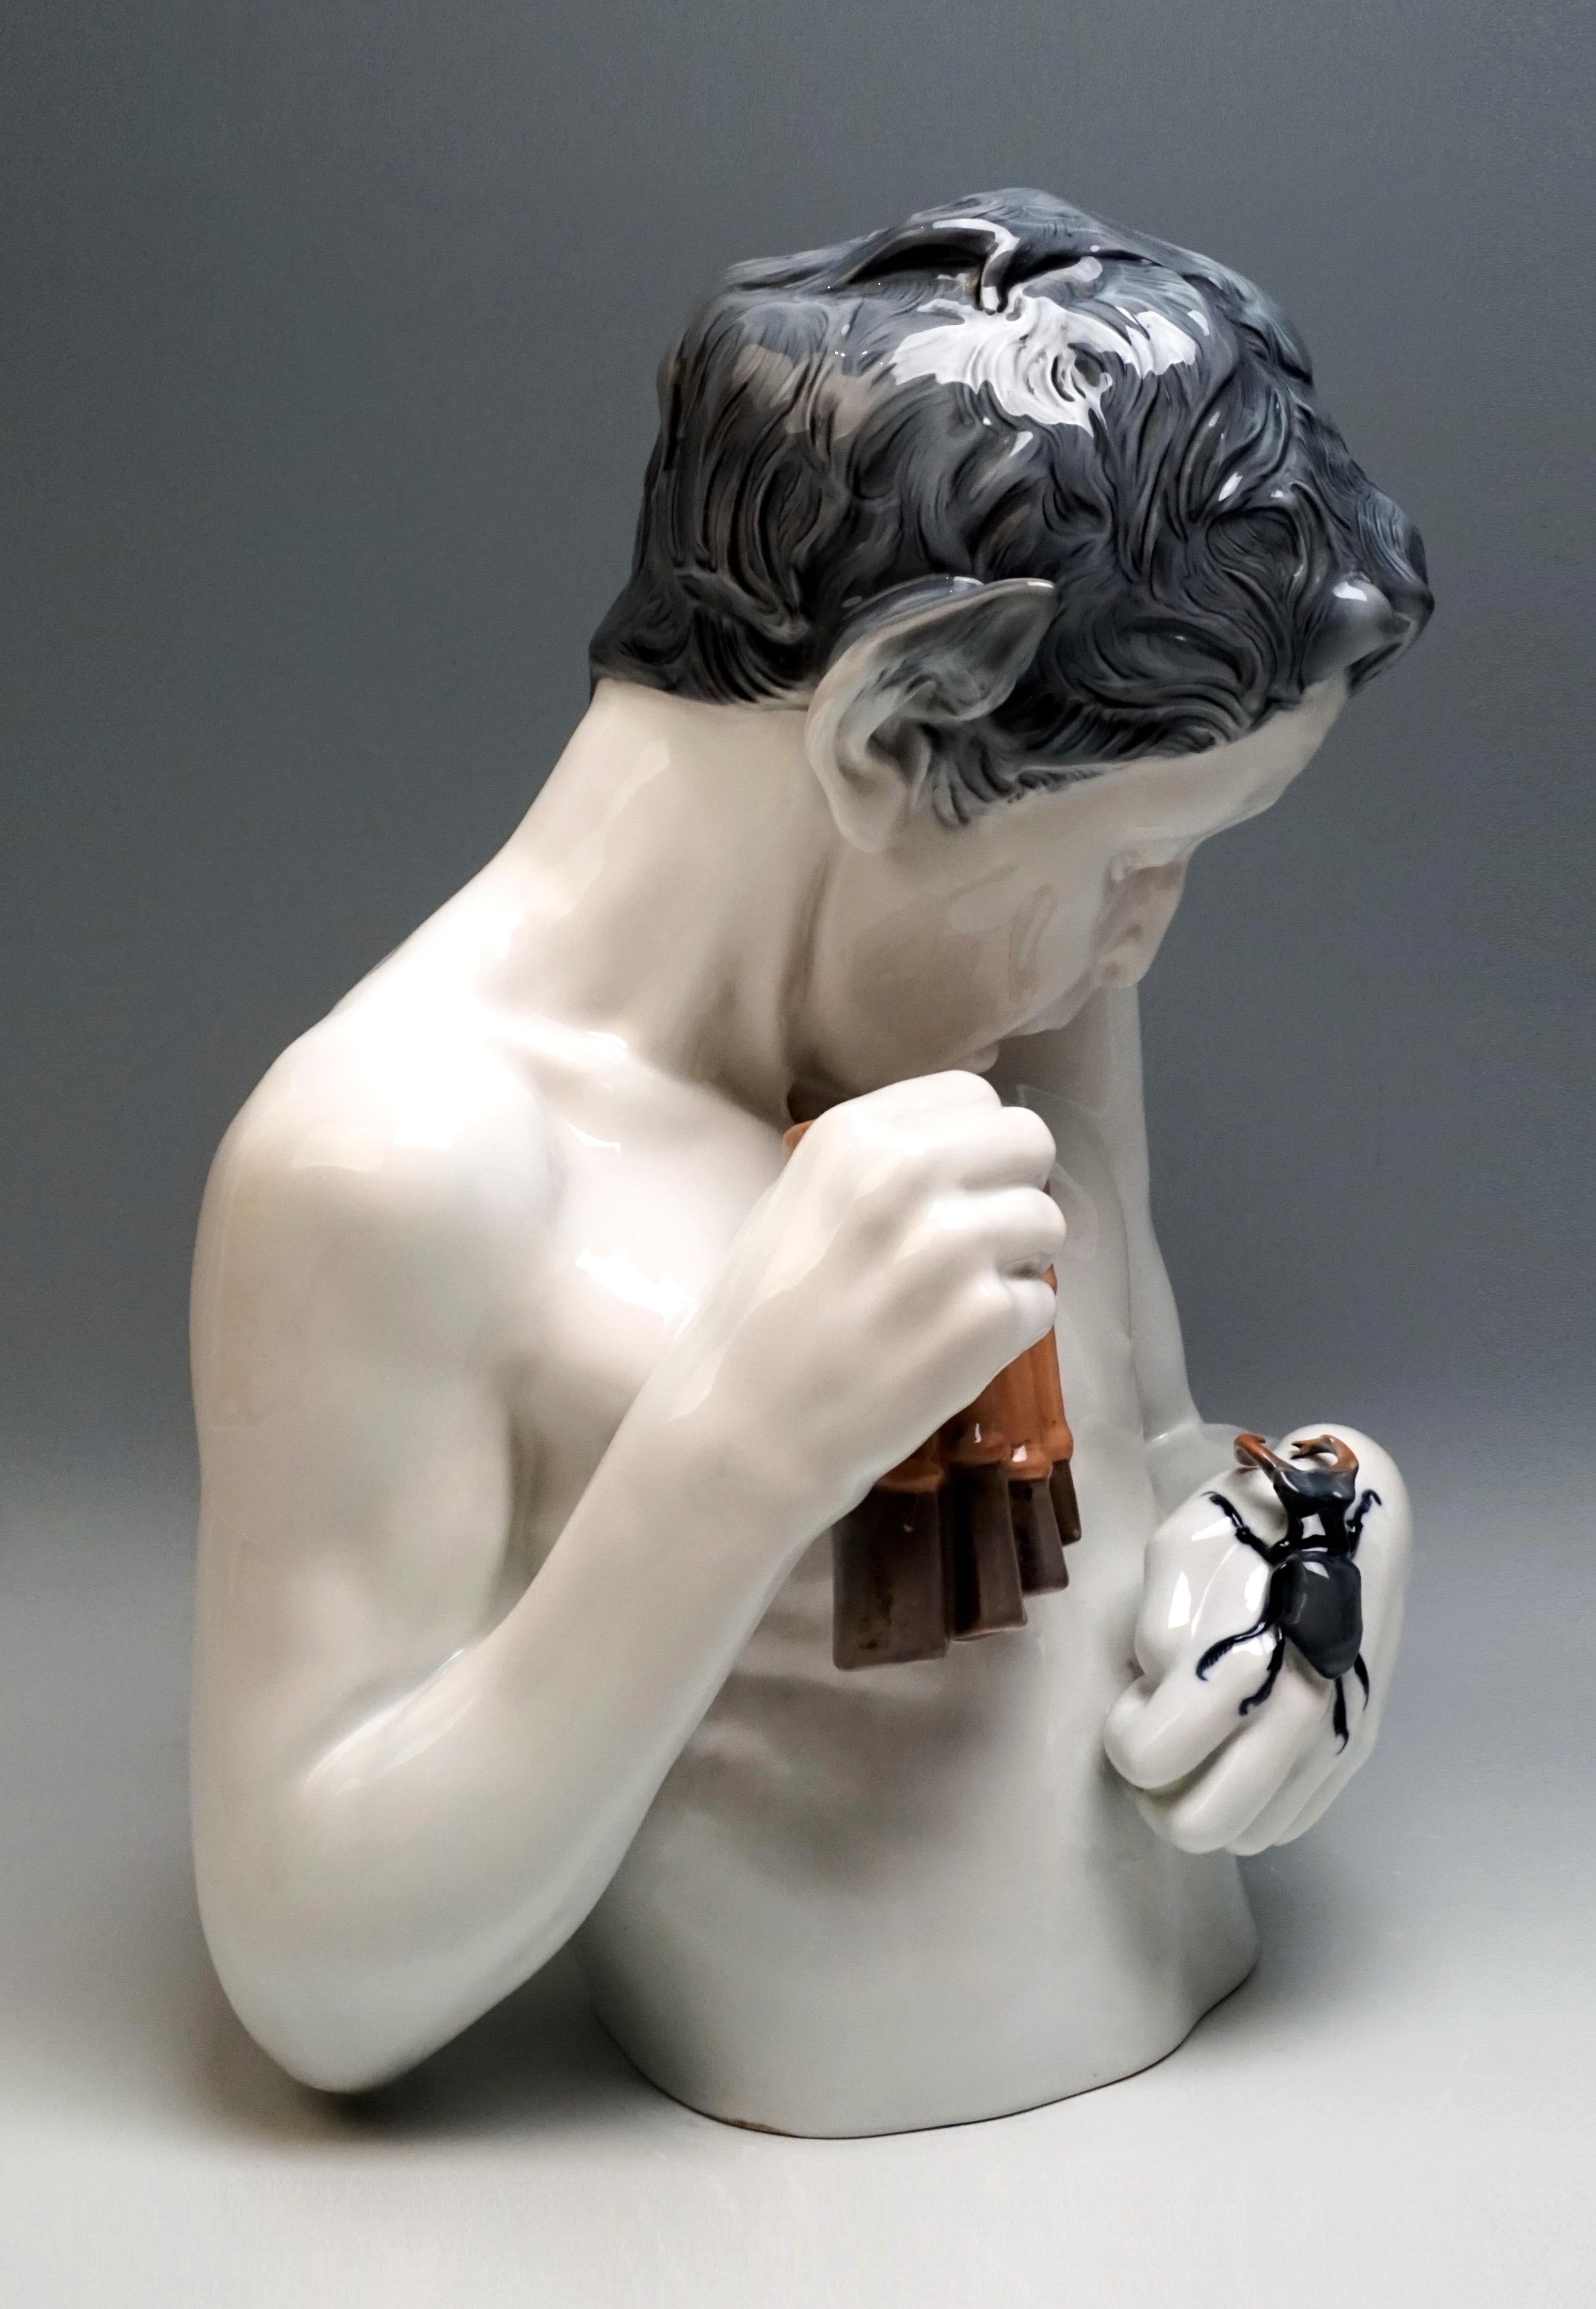 Admirable Art Nouveau figure by Rosenthal
Depiction of a frightened faun from the middle of the abdomen, staring at a stag beetle sitting on his left hand, holding a panpipe in his right. Inscription 'FERD. LIEBERMANN 'on his back.

Manufactory: